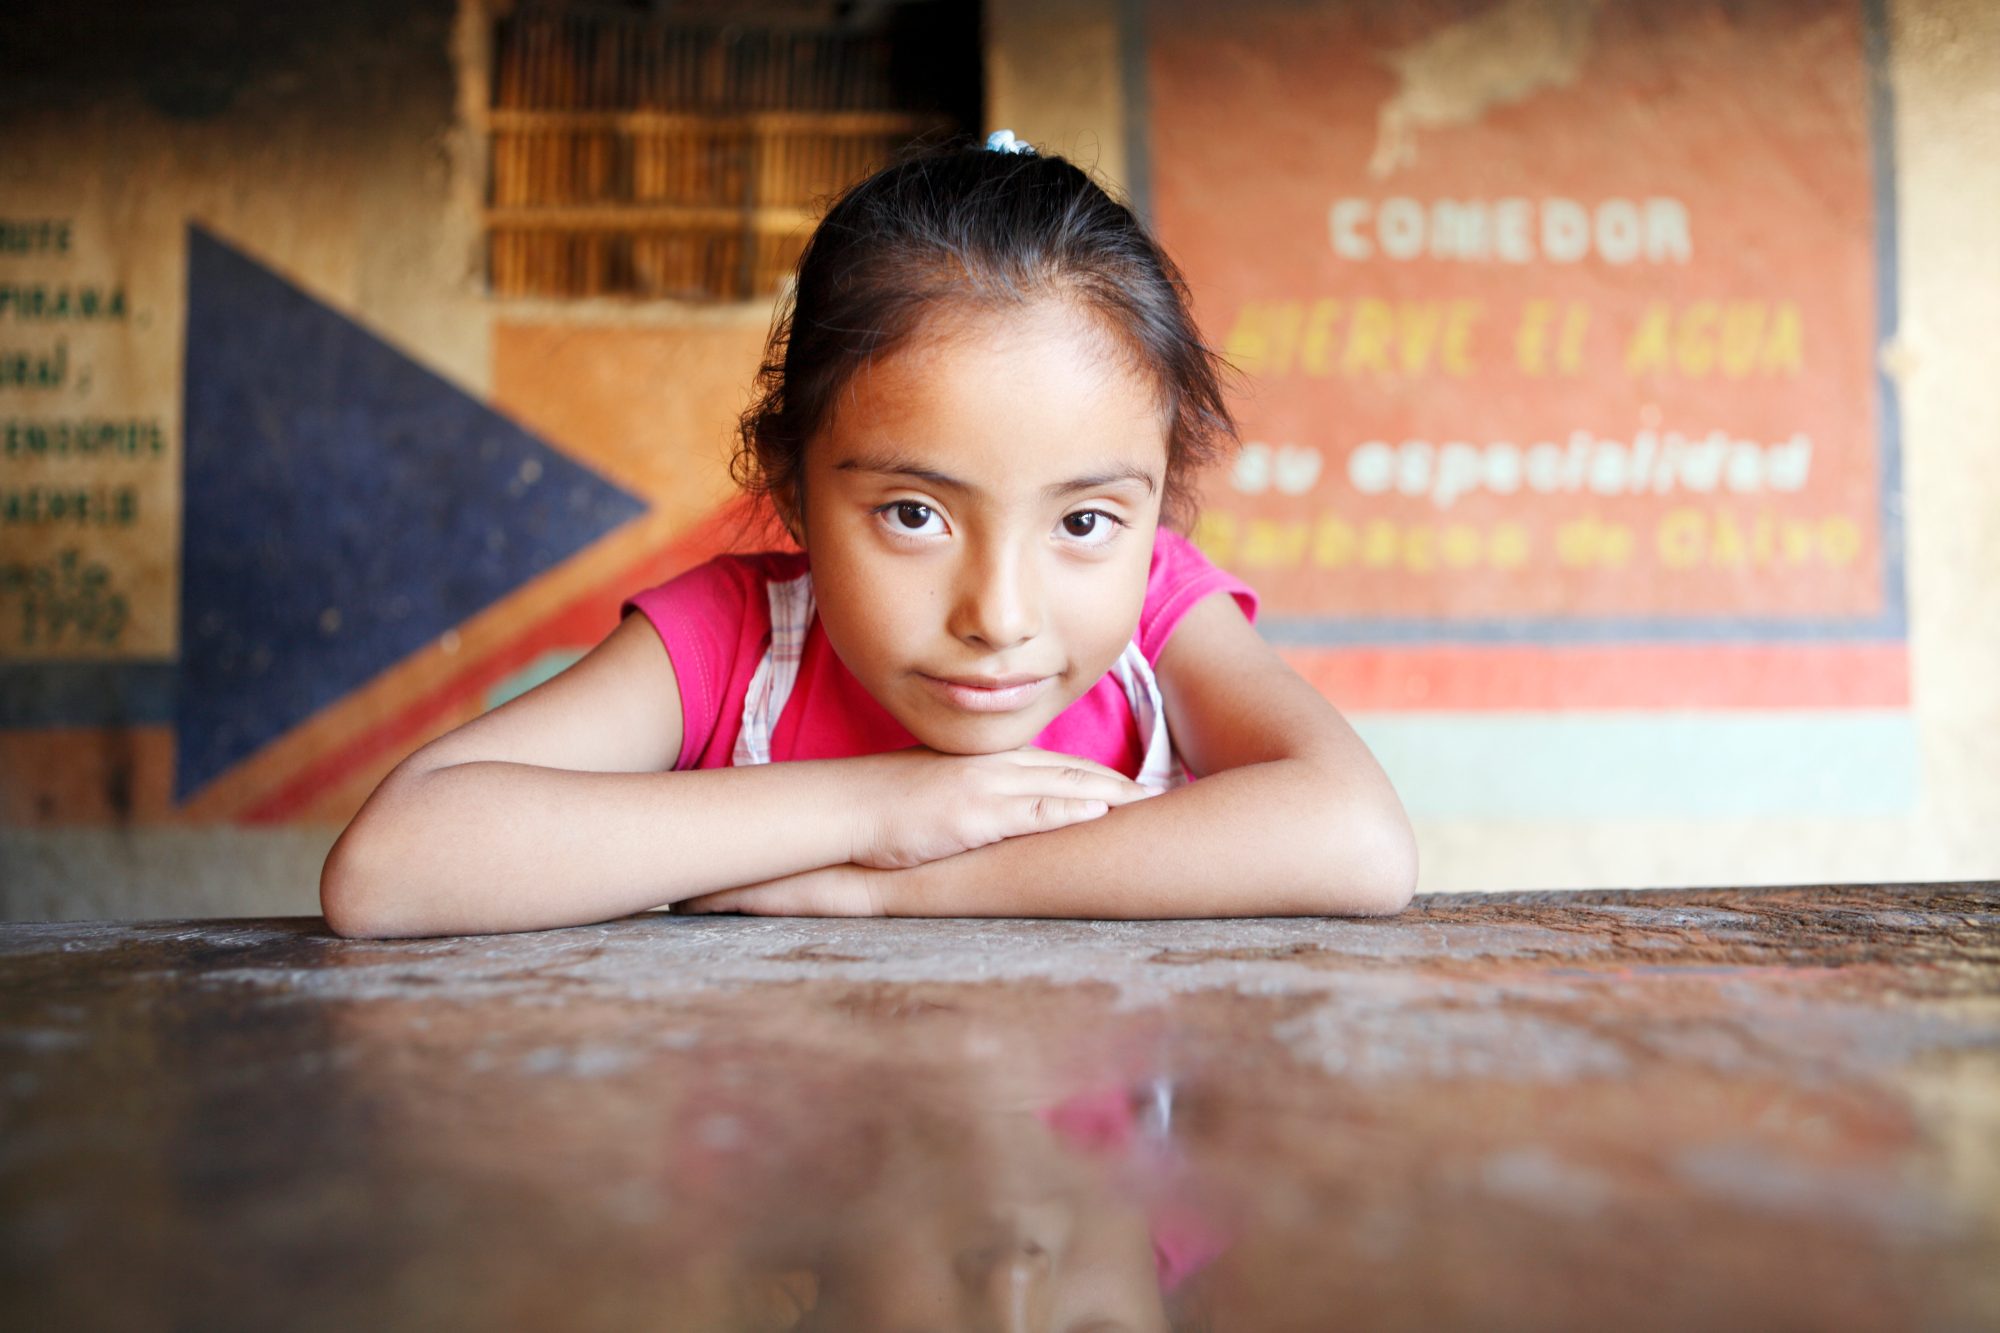 A young girl from Guatemala